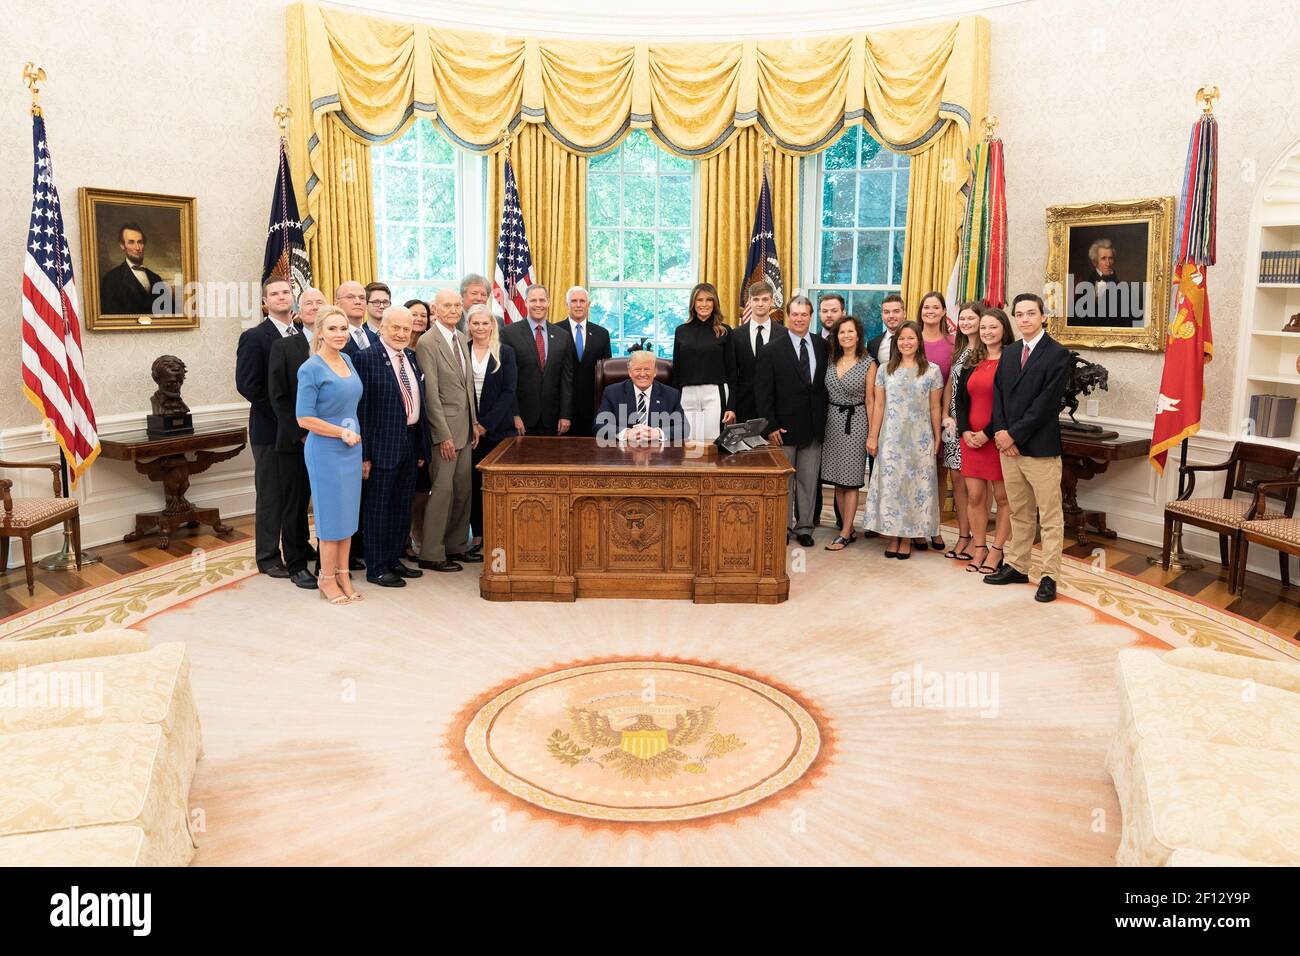 President Donald Trump and First Lady Melania Trump joined by Vice President Mike Pence and NASA Administrator Jim Bridenstine pose for a photo with Apollo 11 astronauts Buzz Aldrin and Michael Collins their family members and the family of Neil Armstrong Friday July 19 2019 during a commemorative photo opportunity for the 50th anniversary of the Apollo 11 moon landing in the Oval Office of the White House. Stock Photo